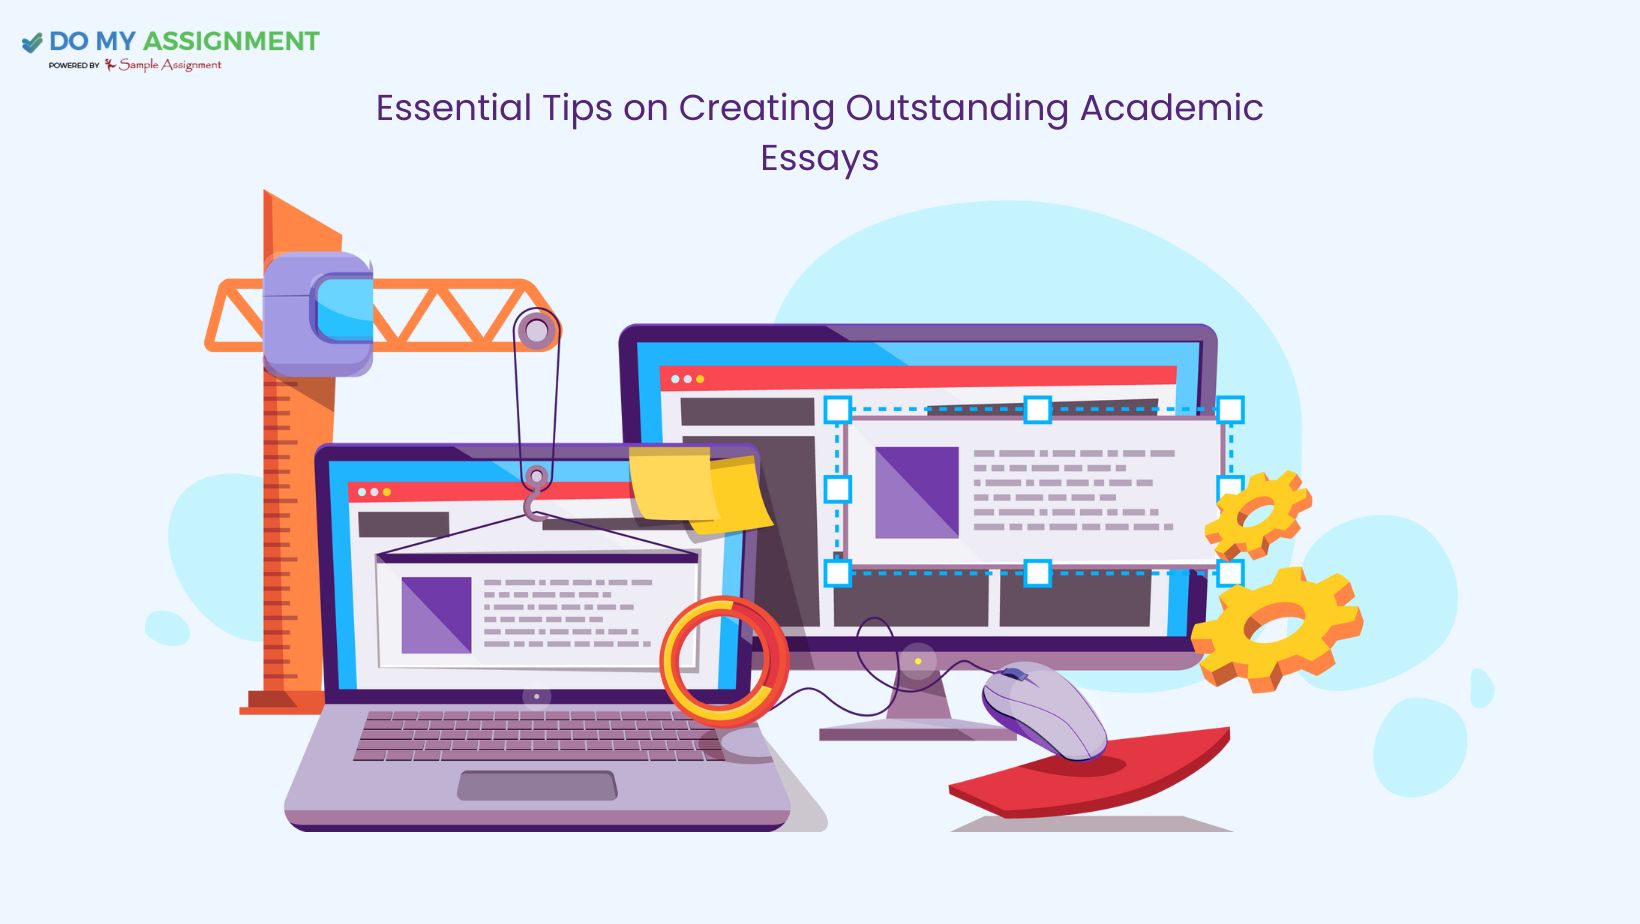 Essential Tips on Creating Outstanding Academic Essays